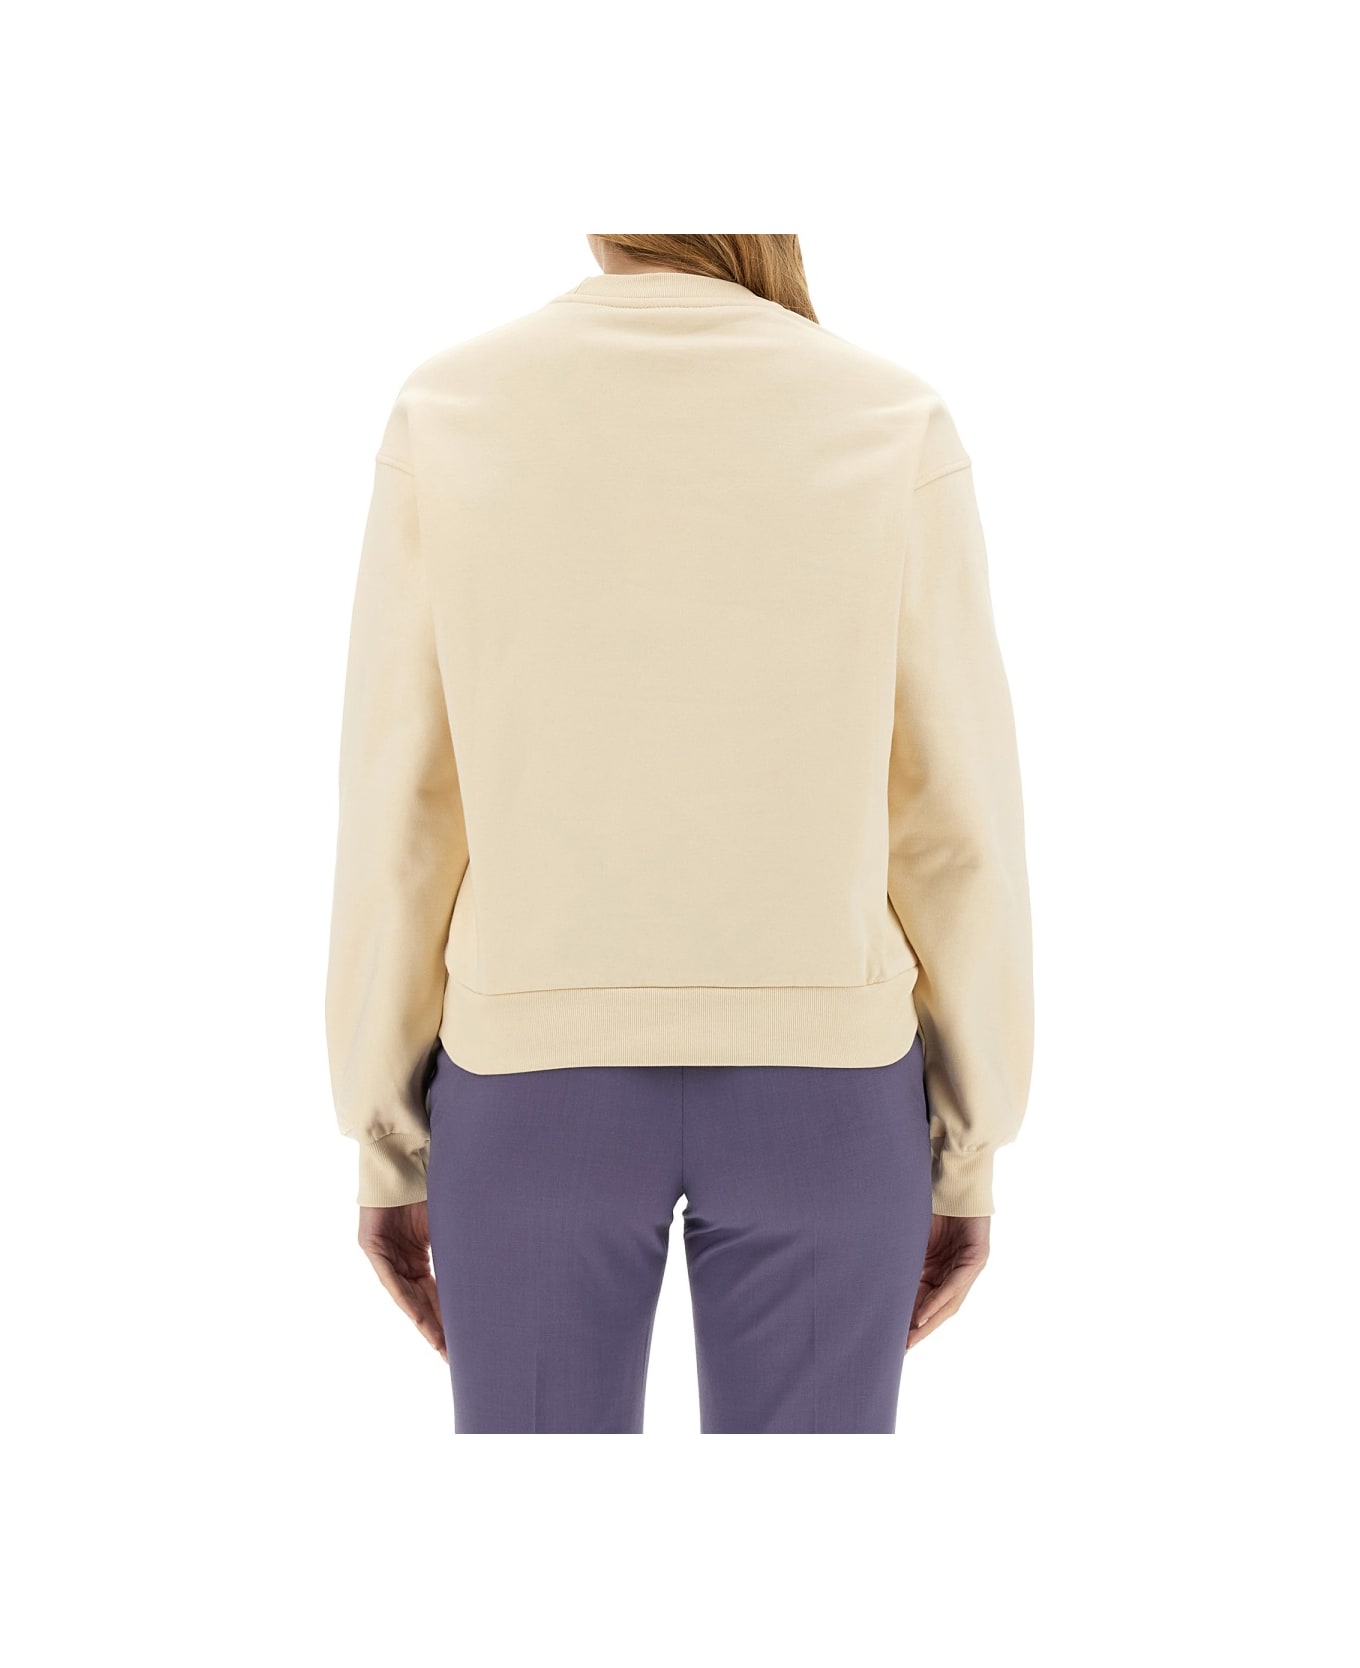 PS by Paul Smith Sweatshirt With Logo - NUDE